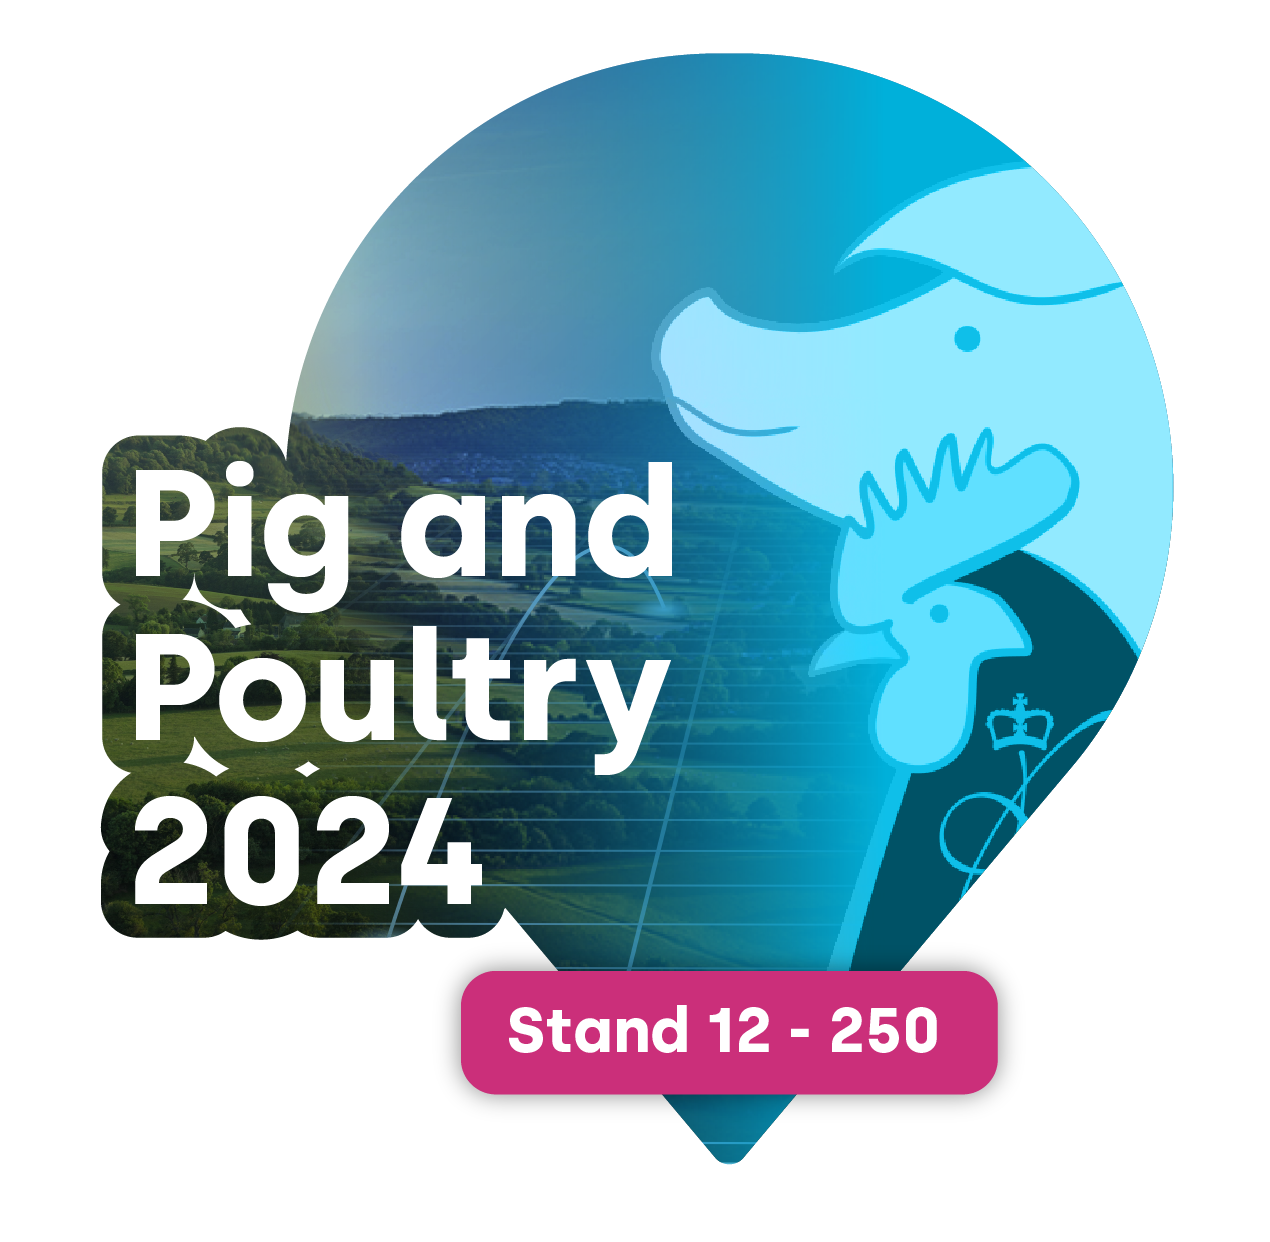 Livetec to attend the Pig and Poultry Fair 2024, stand 12 - 250